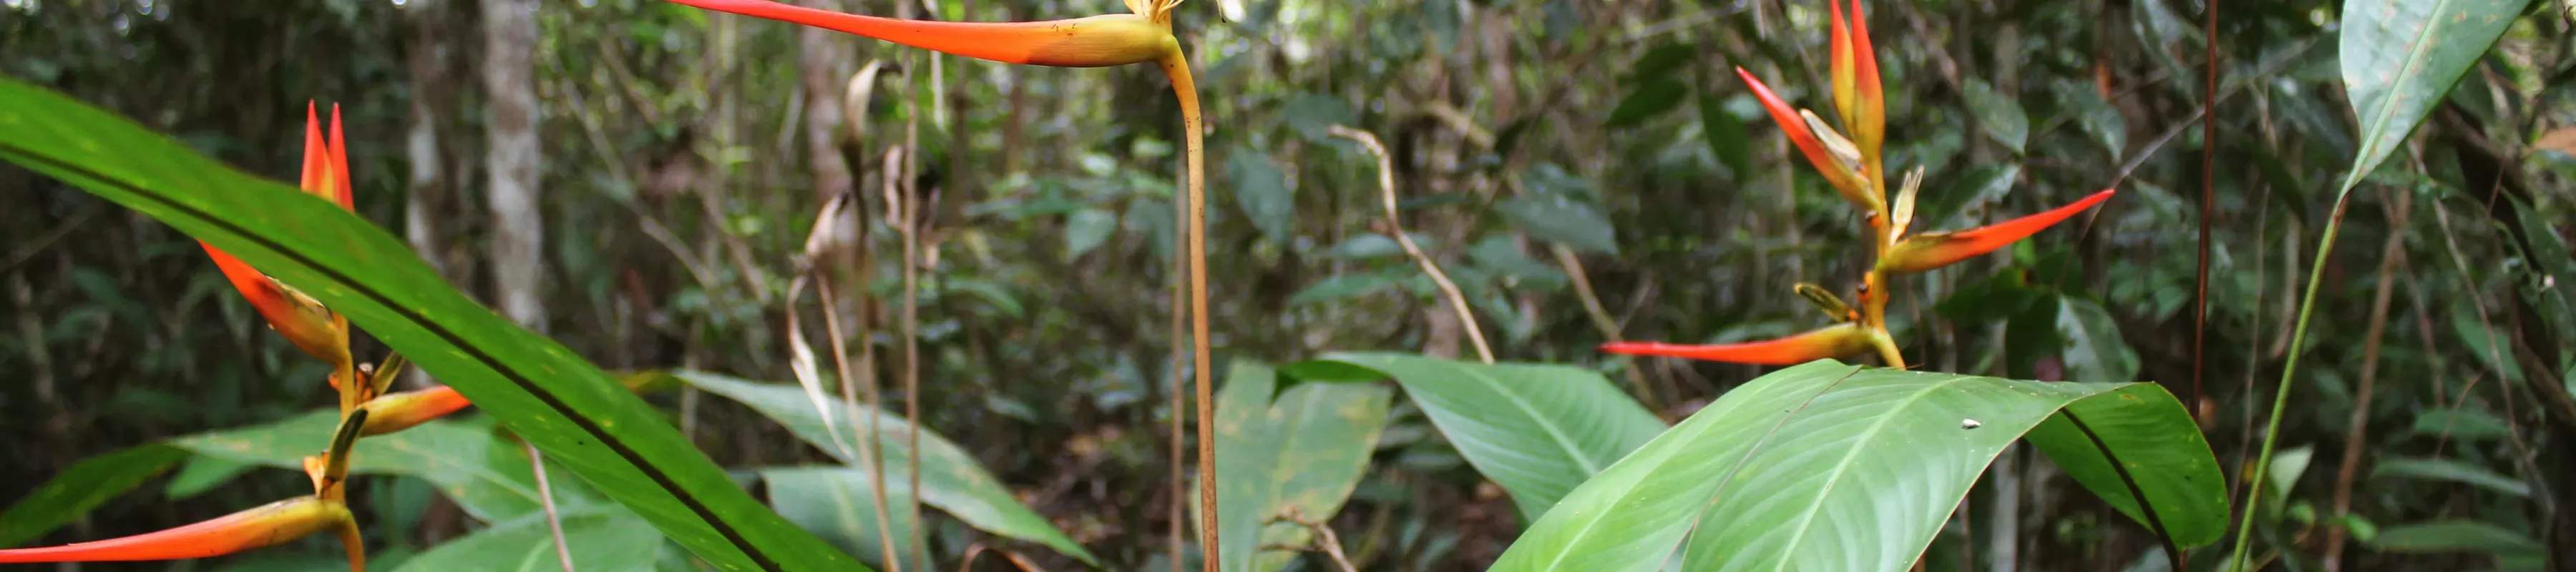 Plants in the Heliconia genus. Large long green leaves are interspersed by long and pointy orange flowers